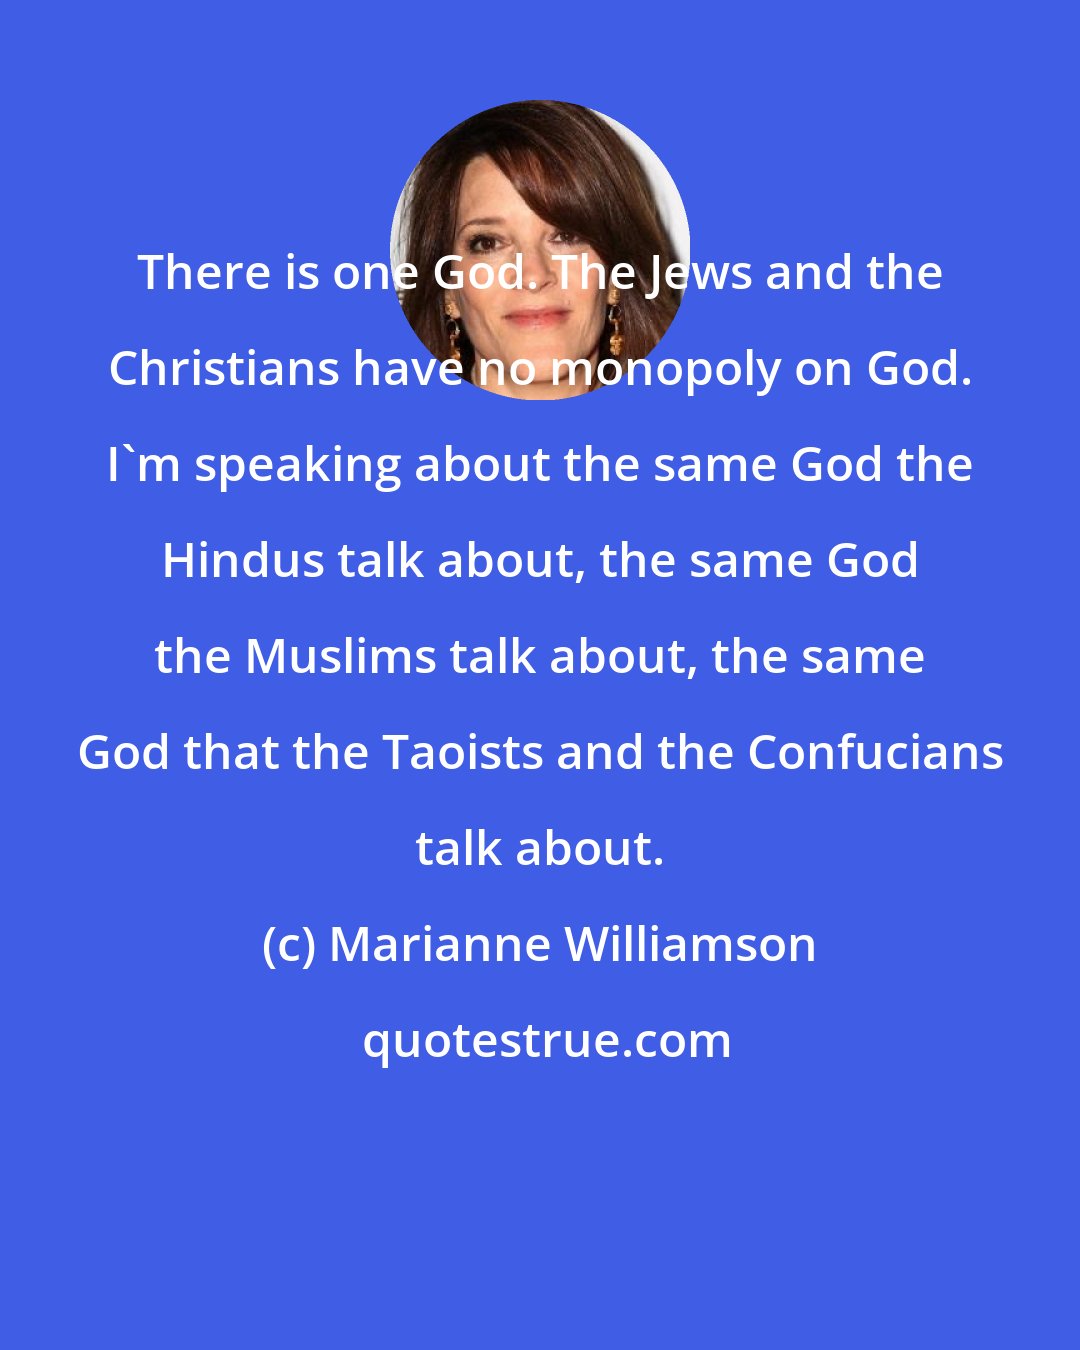 Marianne Williamson: There is one God. The Jews and the Christians have no monopoly on God. I'm speaking about the same God the Hindus talk about, the same God the Muslims talk about, the same God that the Taoists and the Confucians talk about.